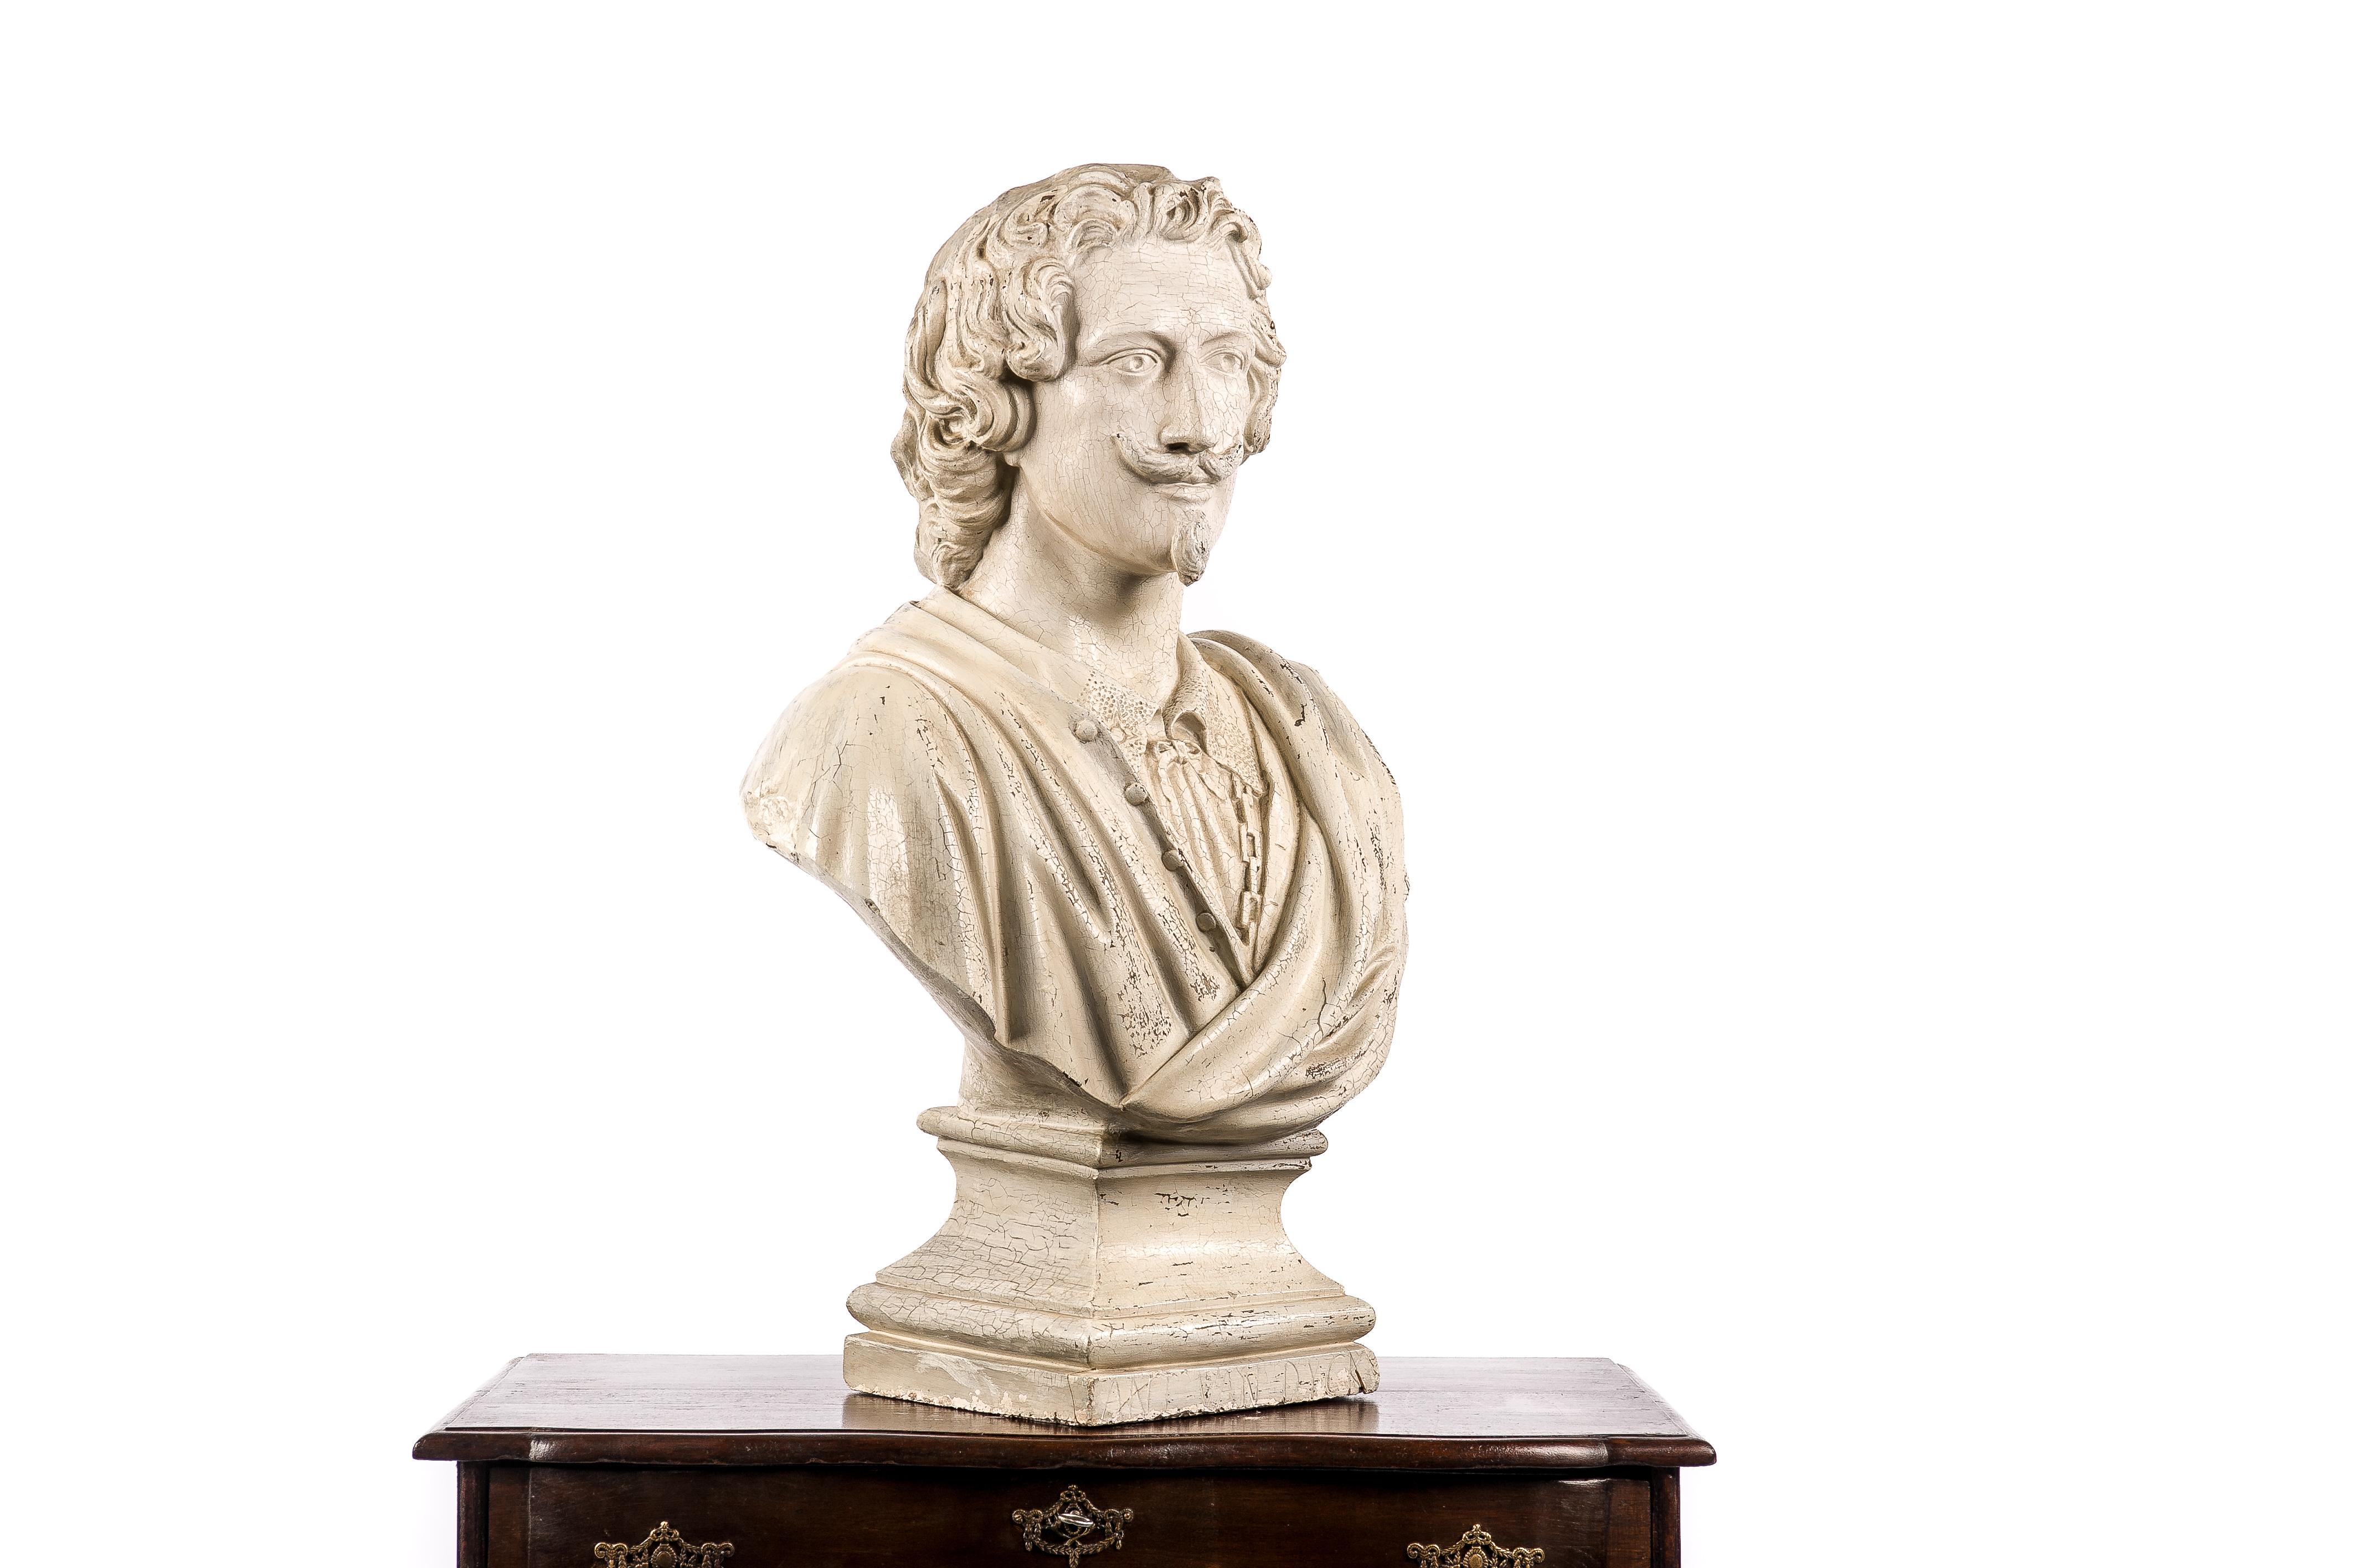 This beautiful bust of the famous Flemish artist Anthony van Dyck was cast in the late 19th century. The bust depicts the painter in his glory days wearing a rich period outfit. The bust shows multiple layers of cracked white paint with rich patina